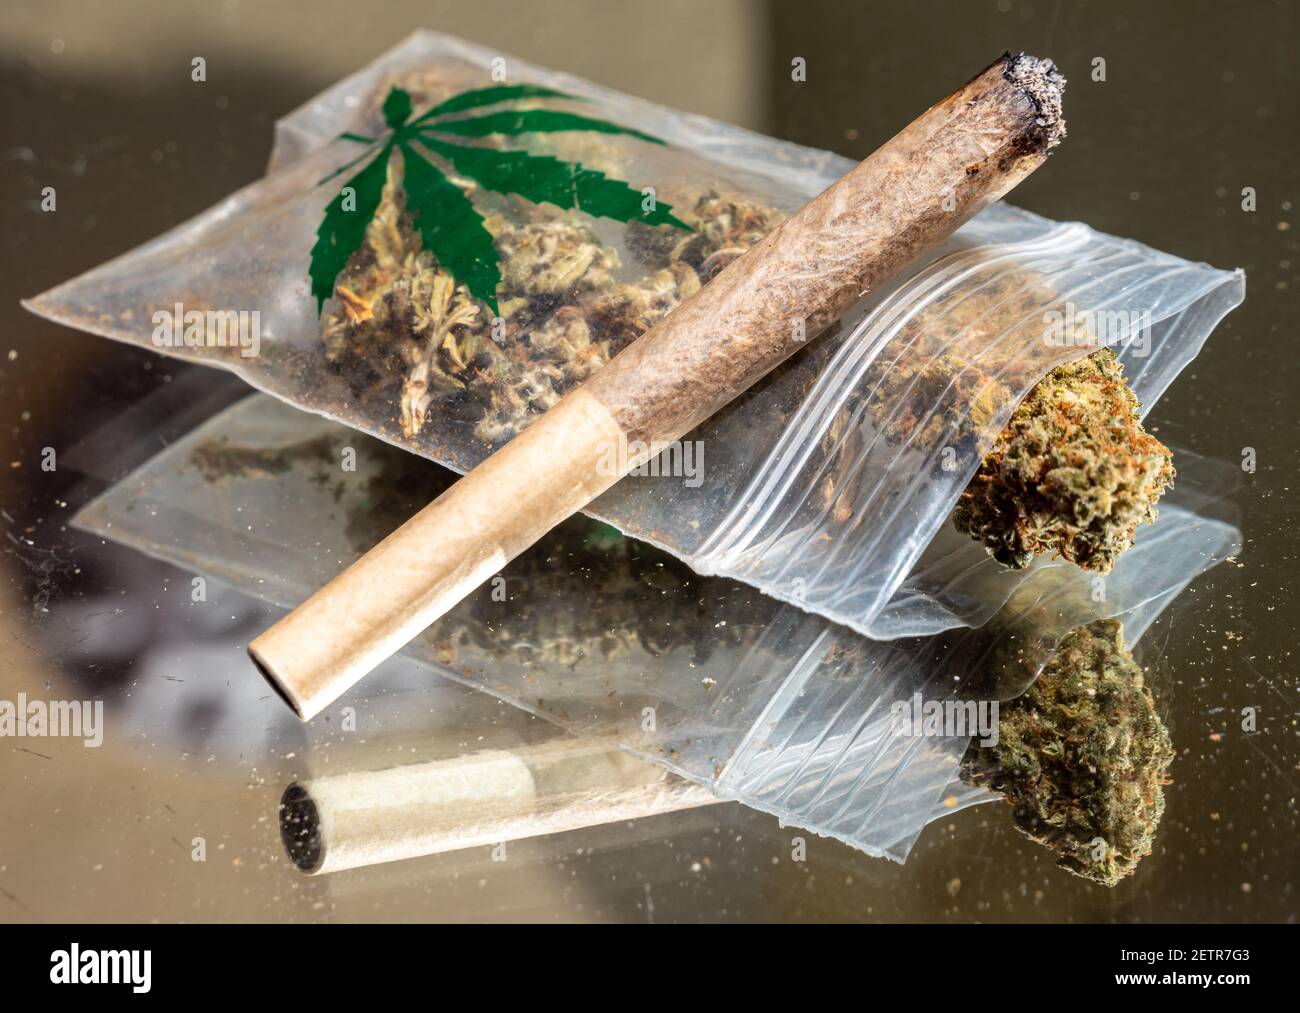 a bag of cannabis with a joint Stock Photo - Alamy